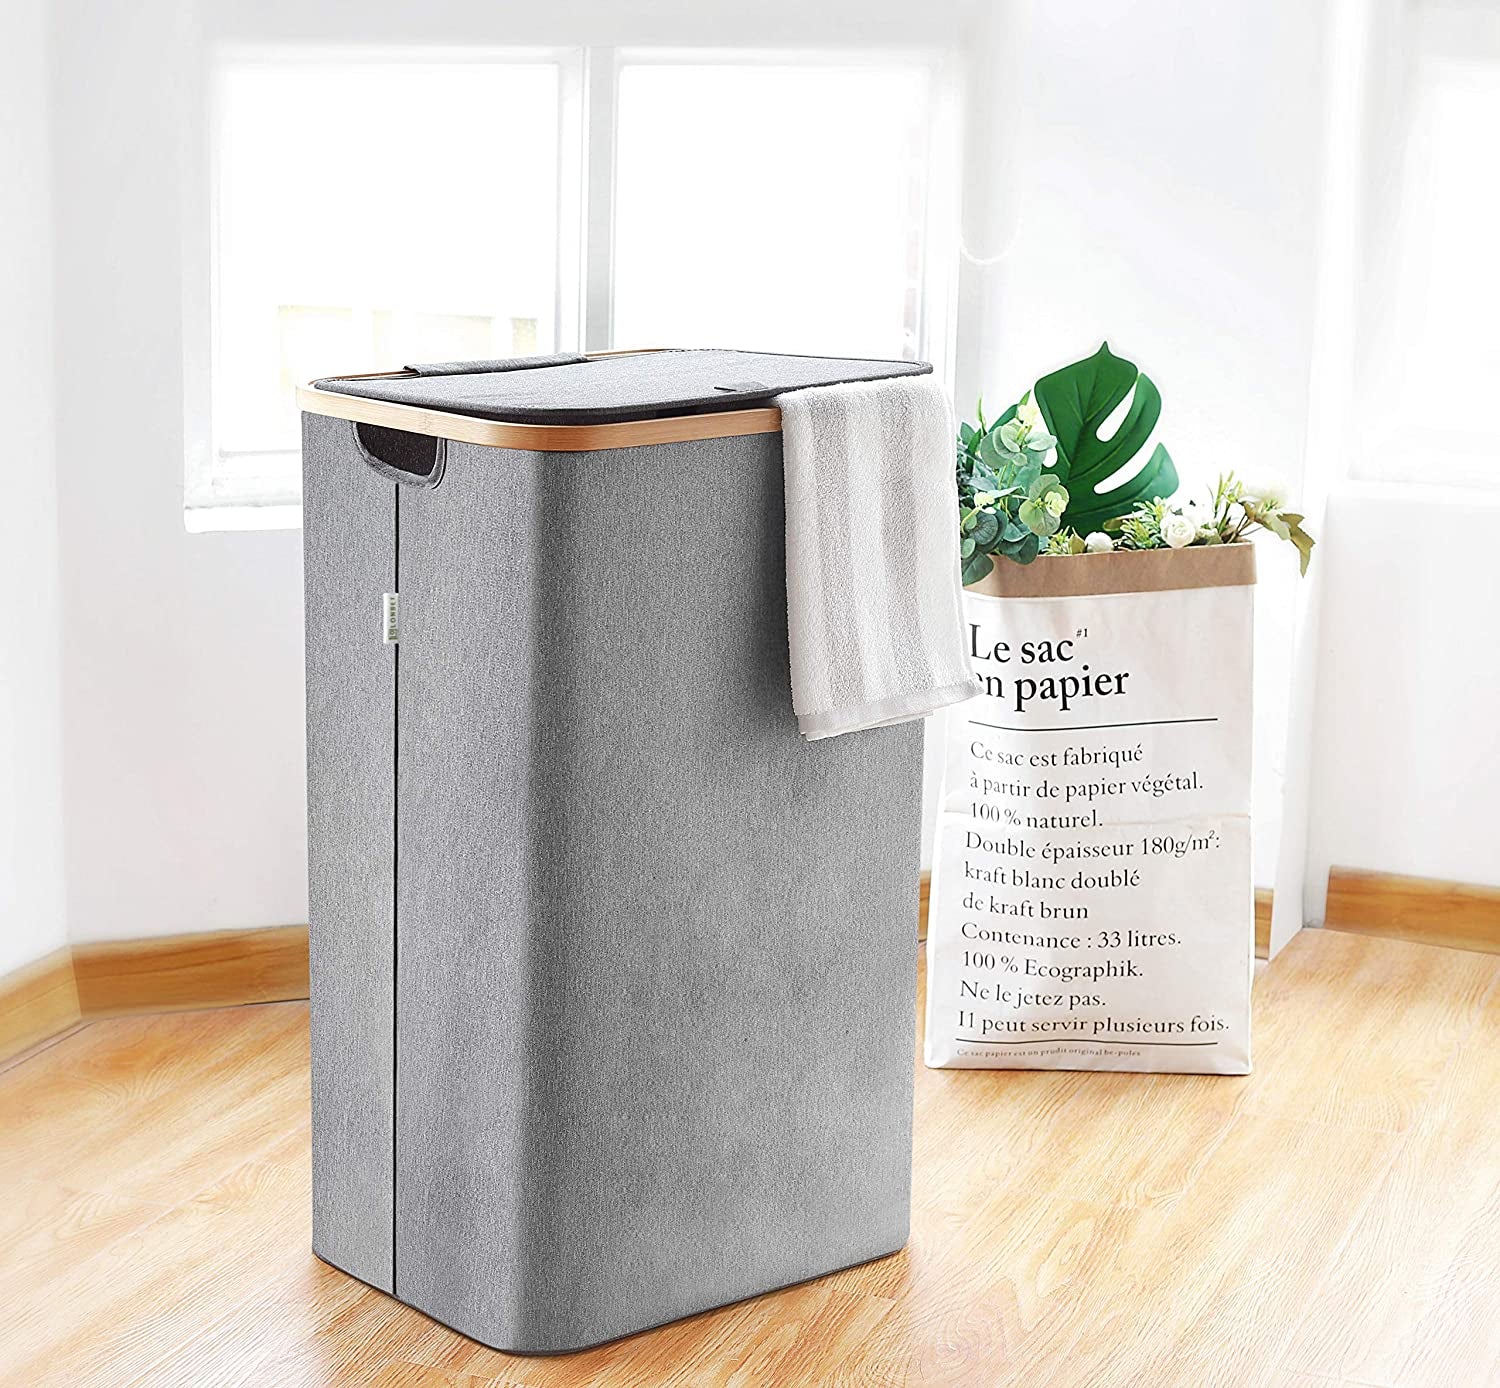 - Laundry Baskets with Lid Grey - XL 100 L - Washing Baskets for Laundry with Laundry Bags - Hamper Basket for Bedrooms - Bamboo Laundry Hamper - Dirty Clothes Laundry Bin